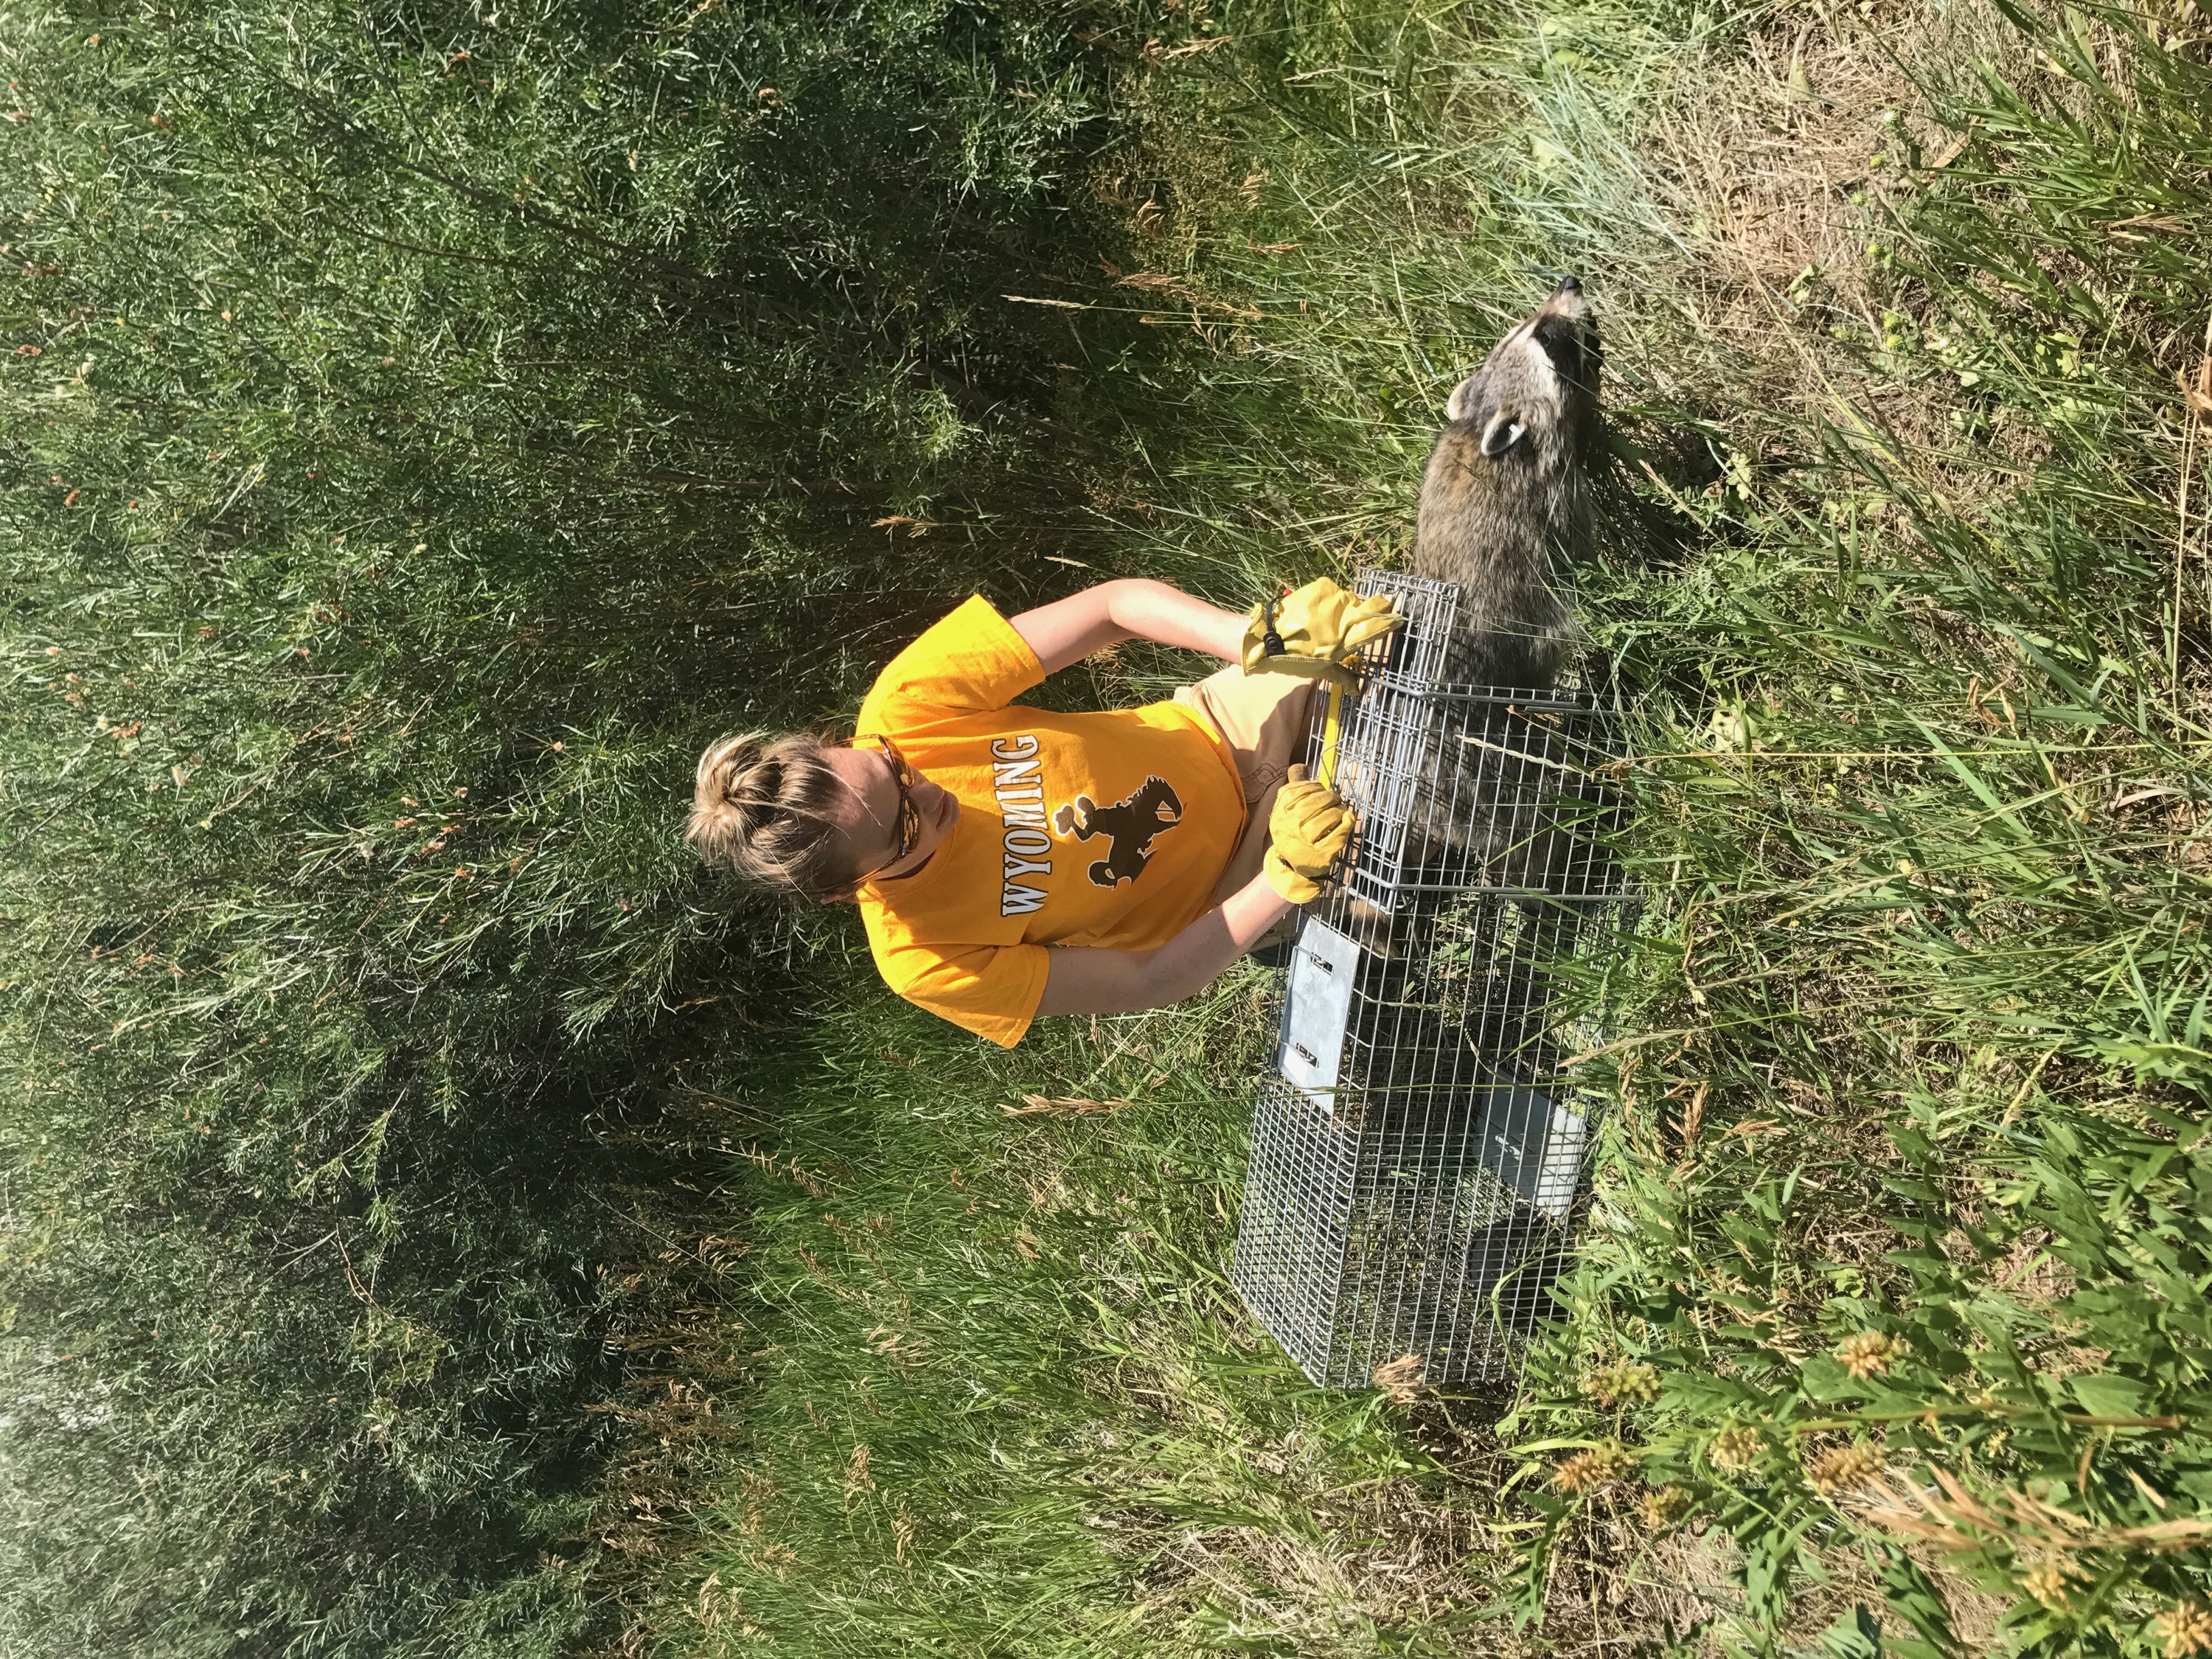 Lauren releasing a raccoon from a trap during the daytime outdoors